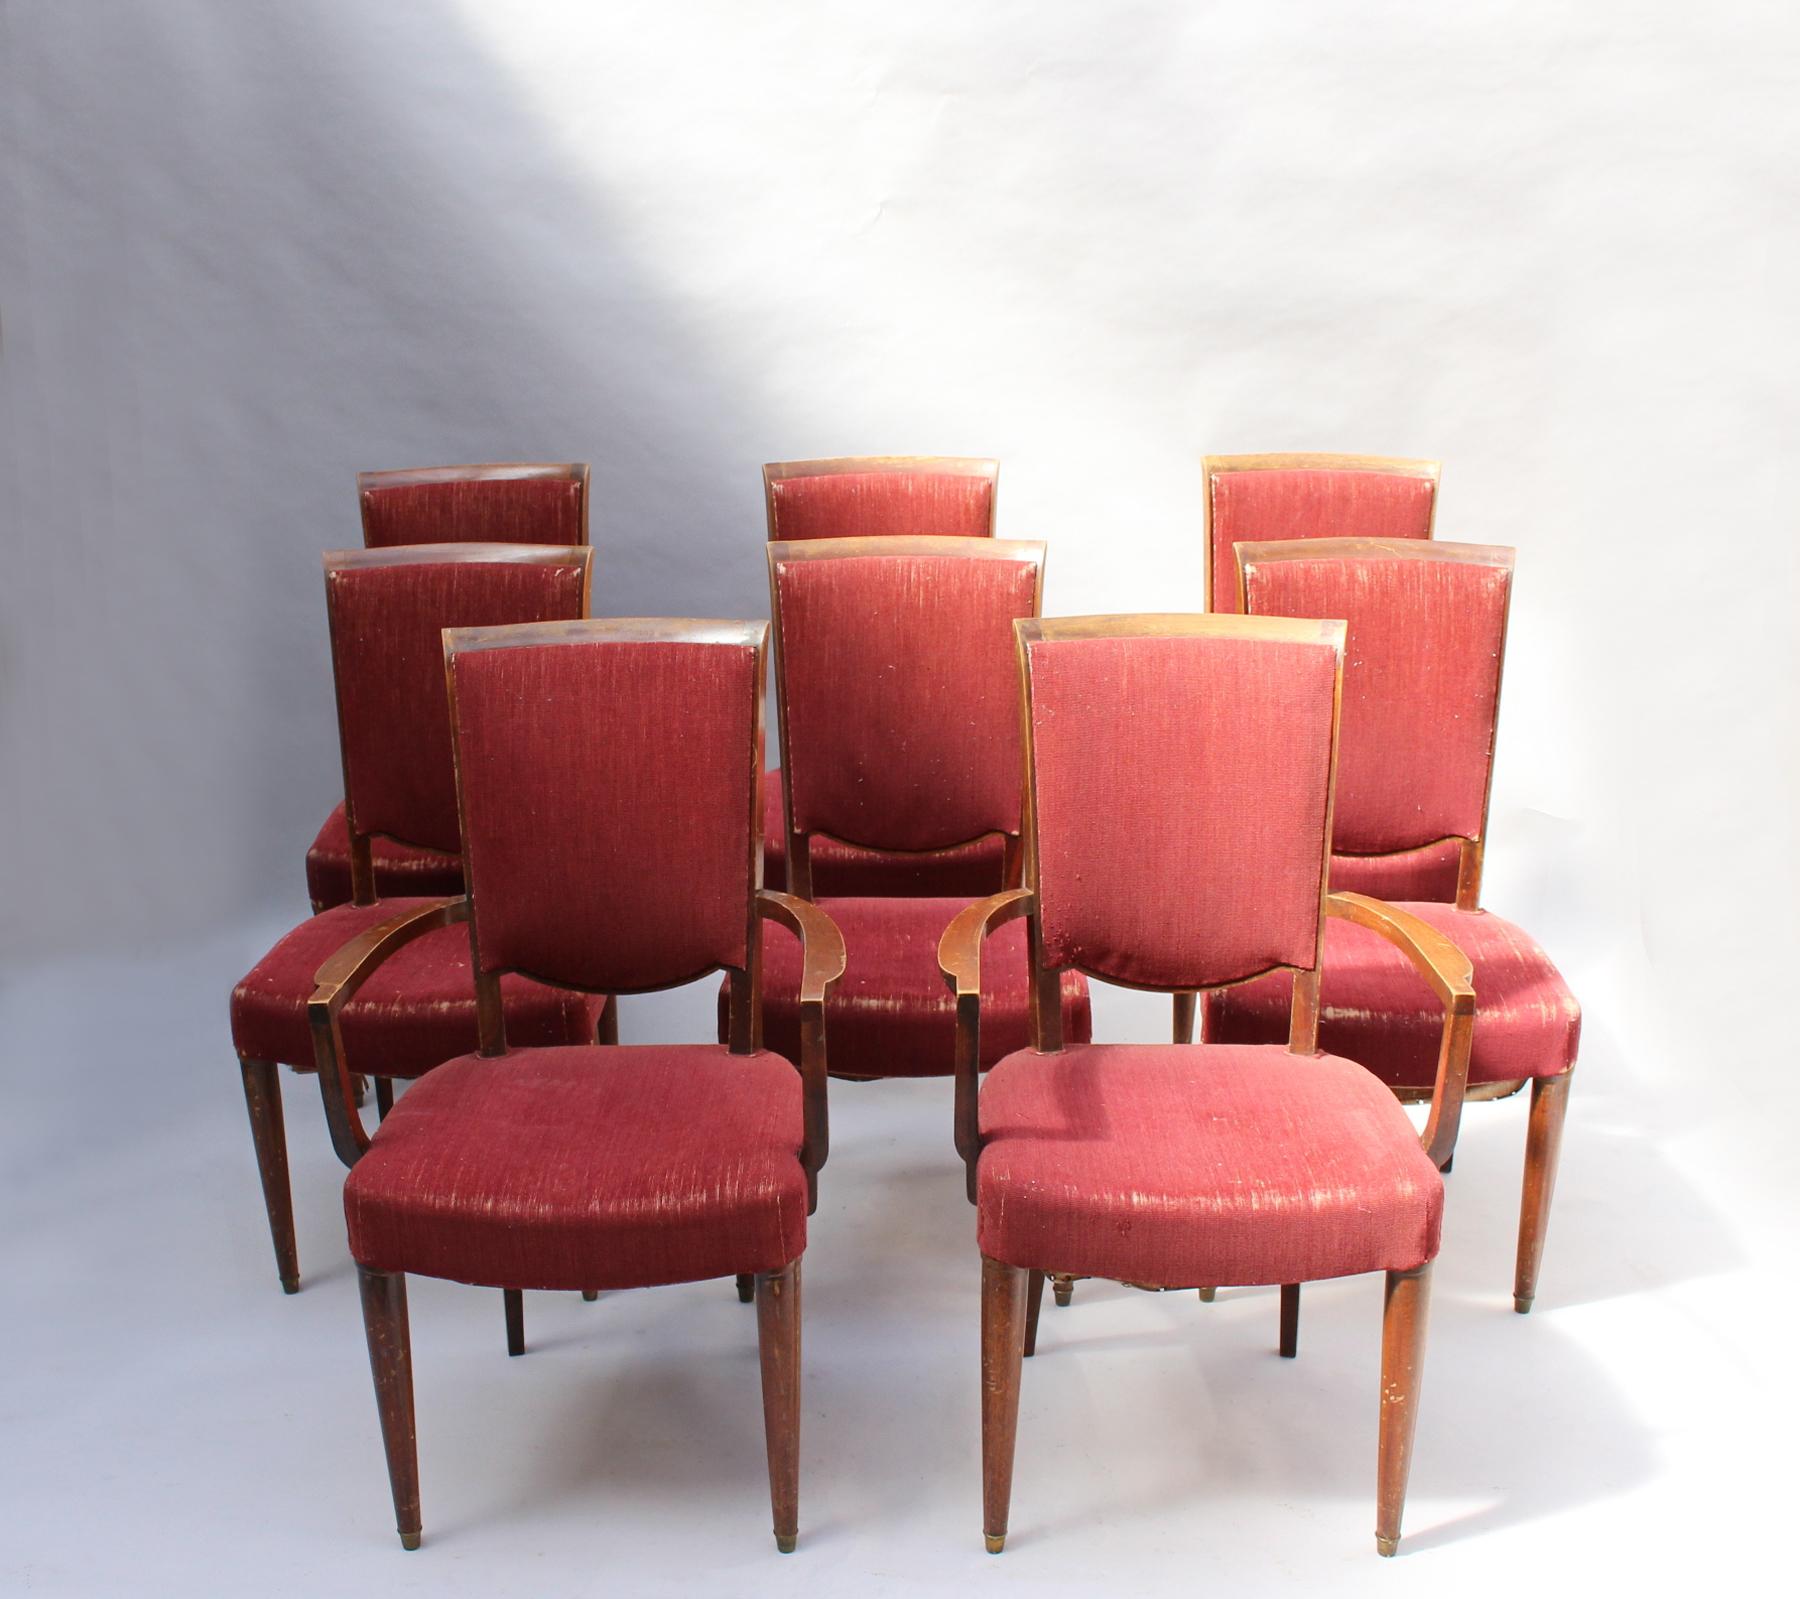 A set of 8 fine French Art Deco mahogany dining chairs (6 side and 2 arm) by Jules Leleu.
Price includes refinishing.
Documented: see pictures.

Armchair dimensions:
H 35 5/8